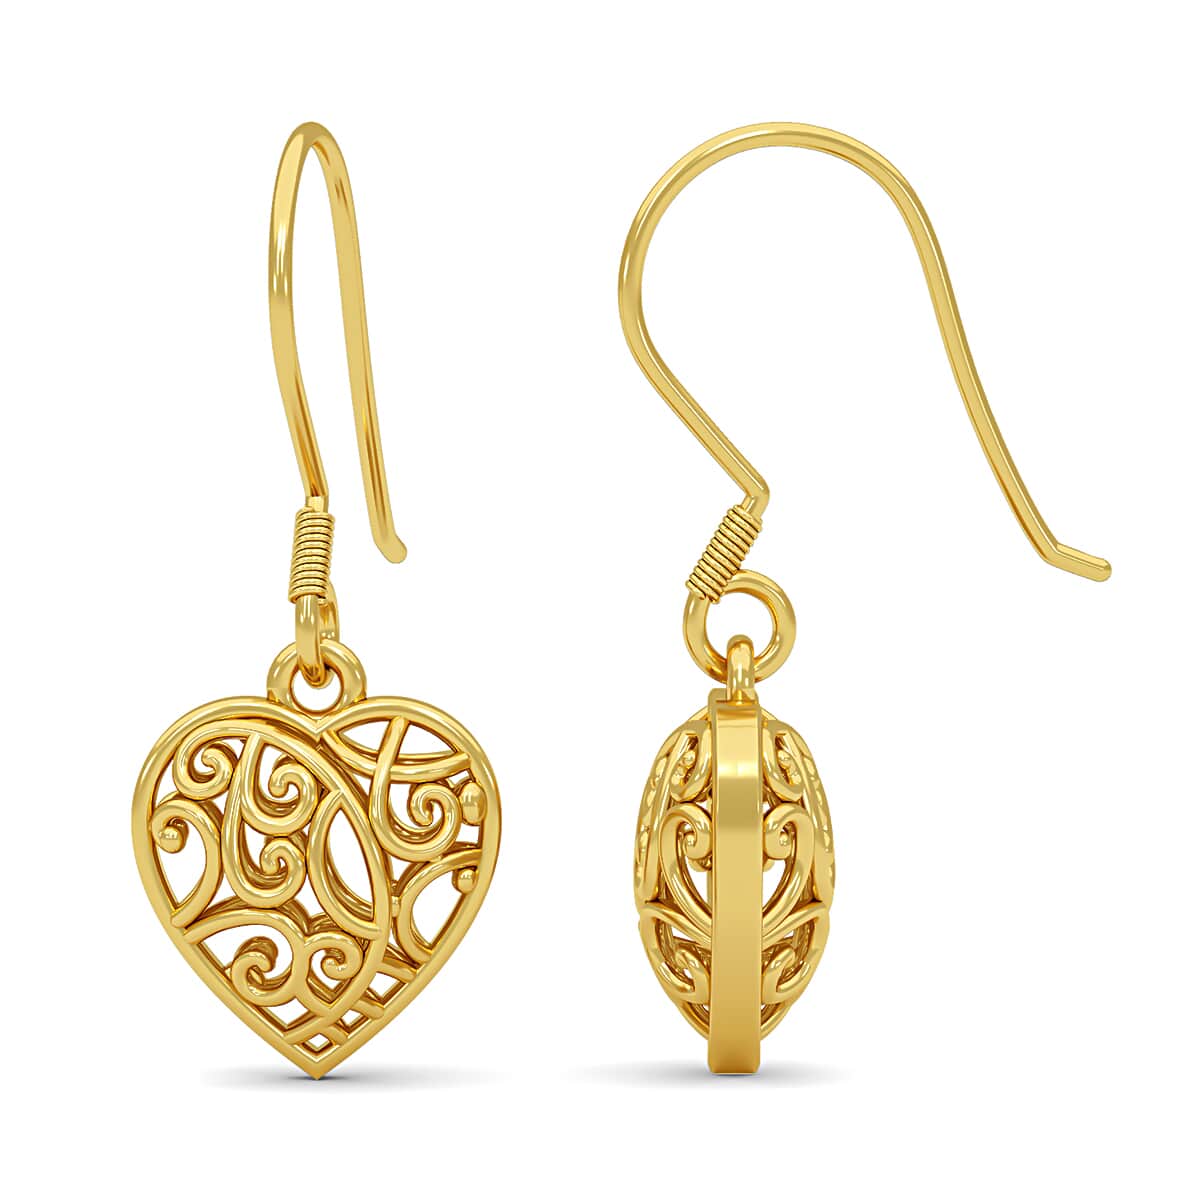 Mother’s Day Gift Openwork Drop Dangle Earrings in 14K Yellow Gold Plated Sterling Silver, Filigree Heart Earrings, Dangle Silver Earrings For Women image number 6